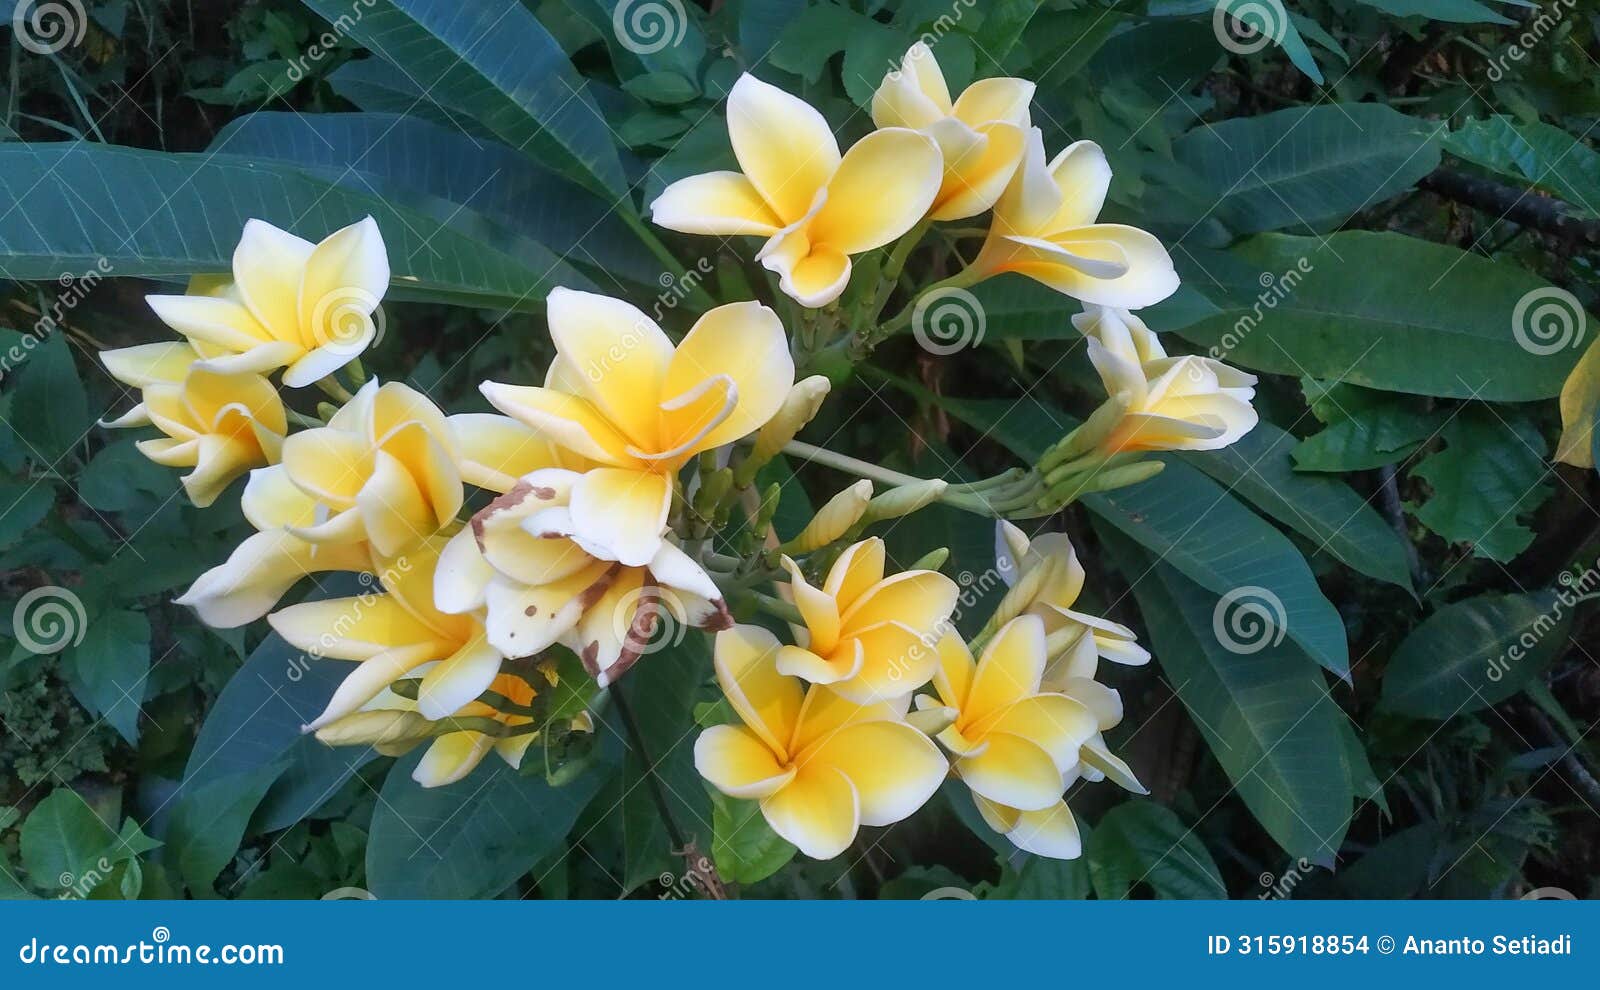 a group of gorgeous frangipani flowers in the garden